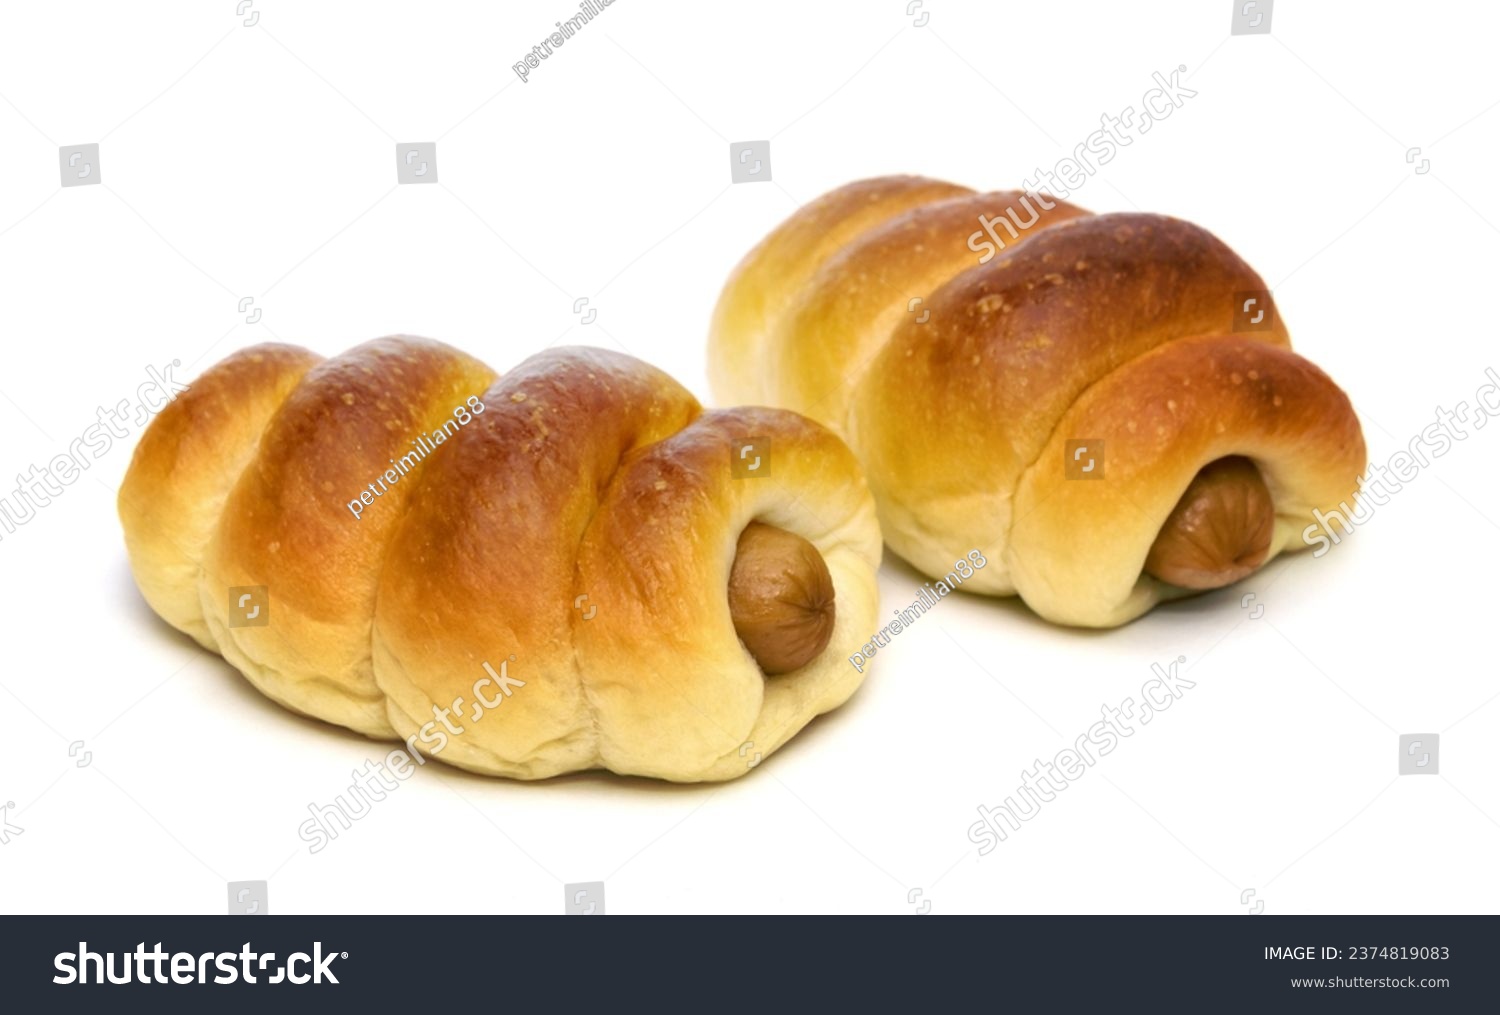 Sausage bread isolated on white background #2374819083